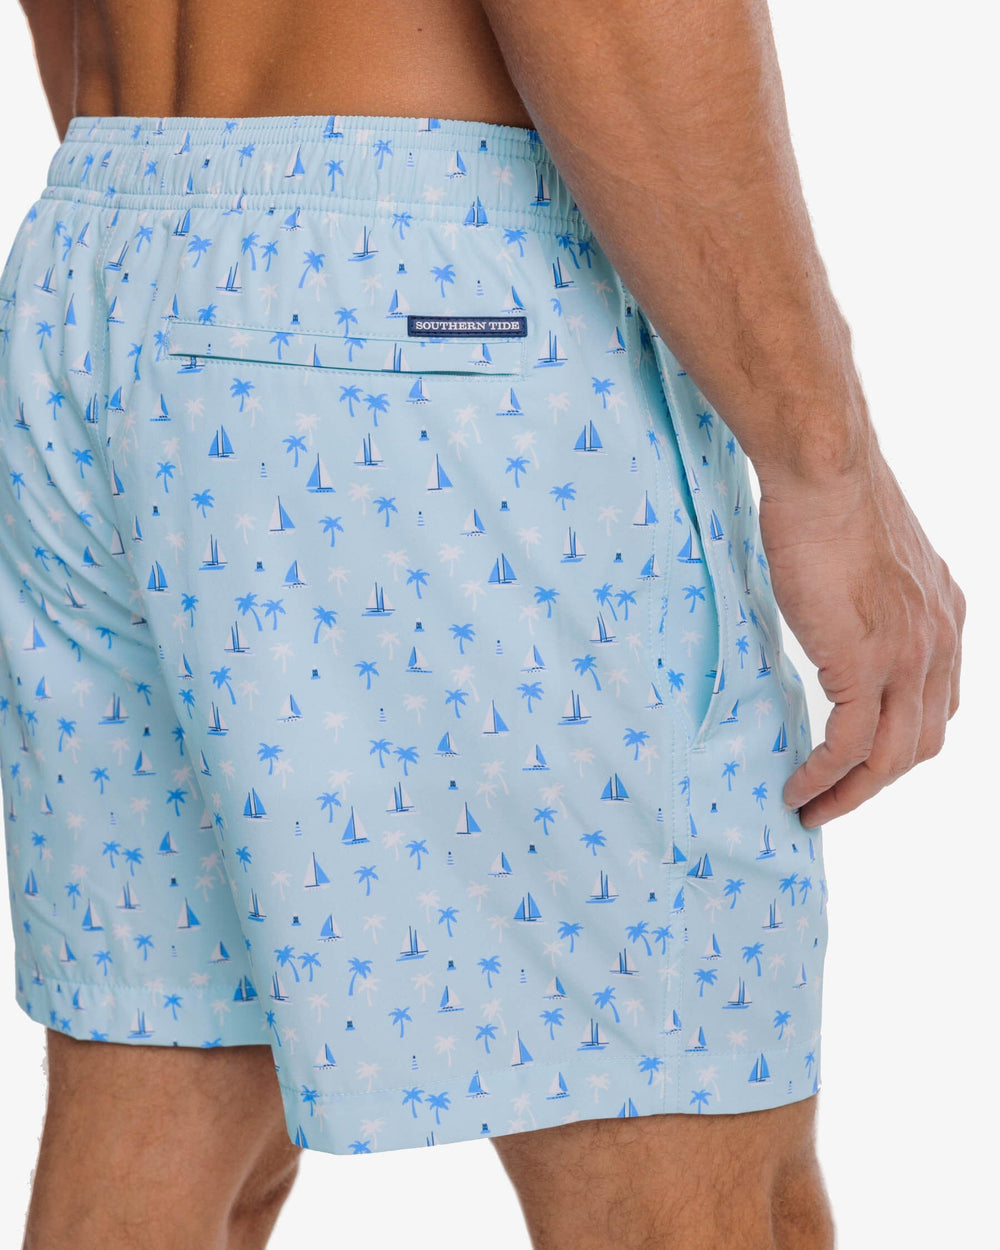 The detail view of the Southern Tide Seascape Sailing Printed Swim Trunk by Southern Tide - Baltic Teal